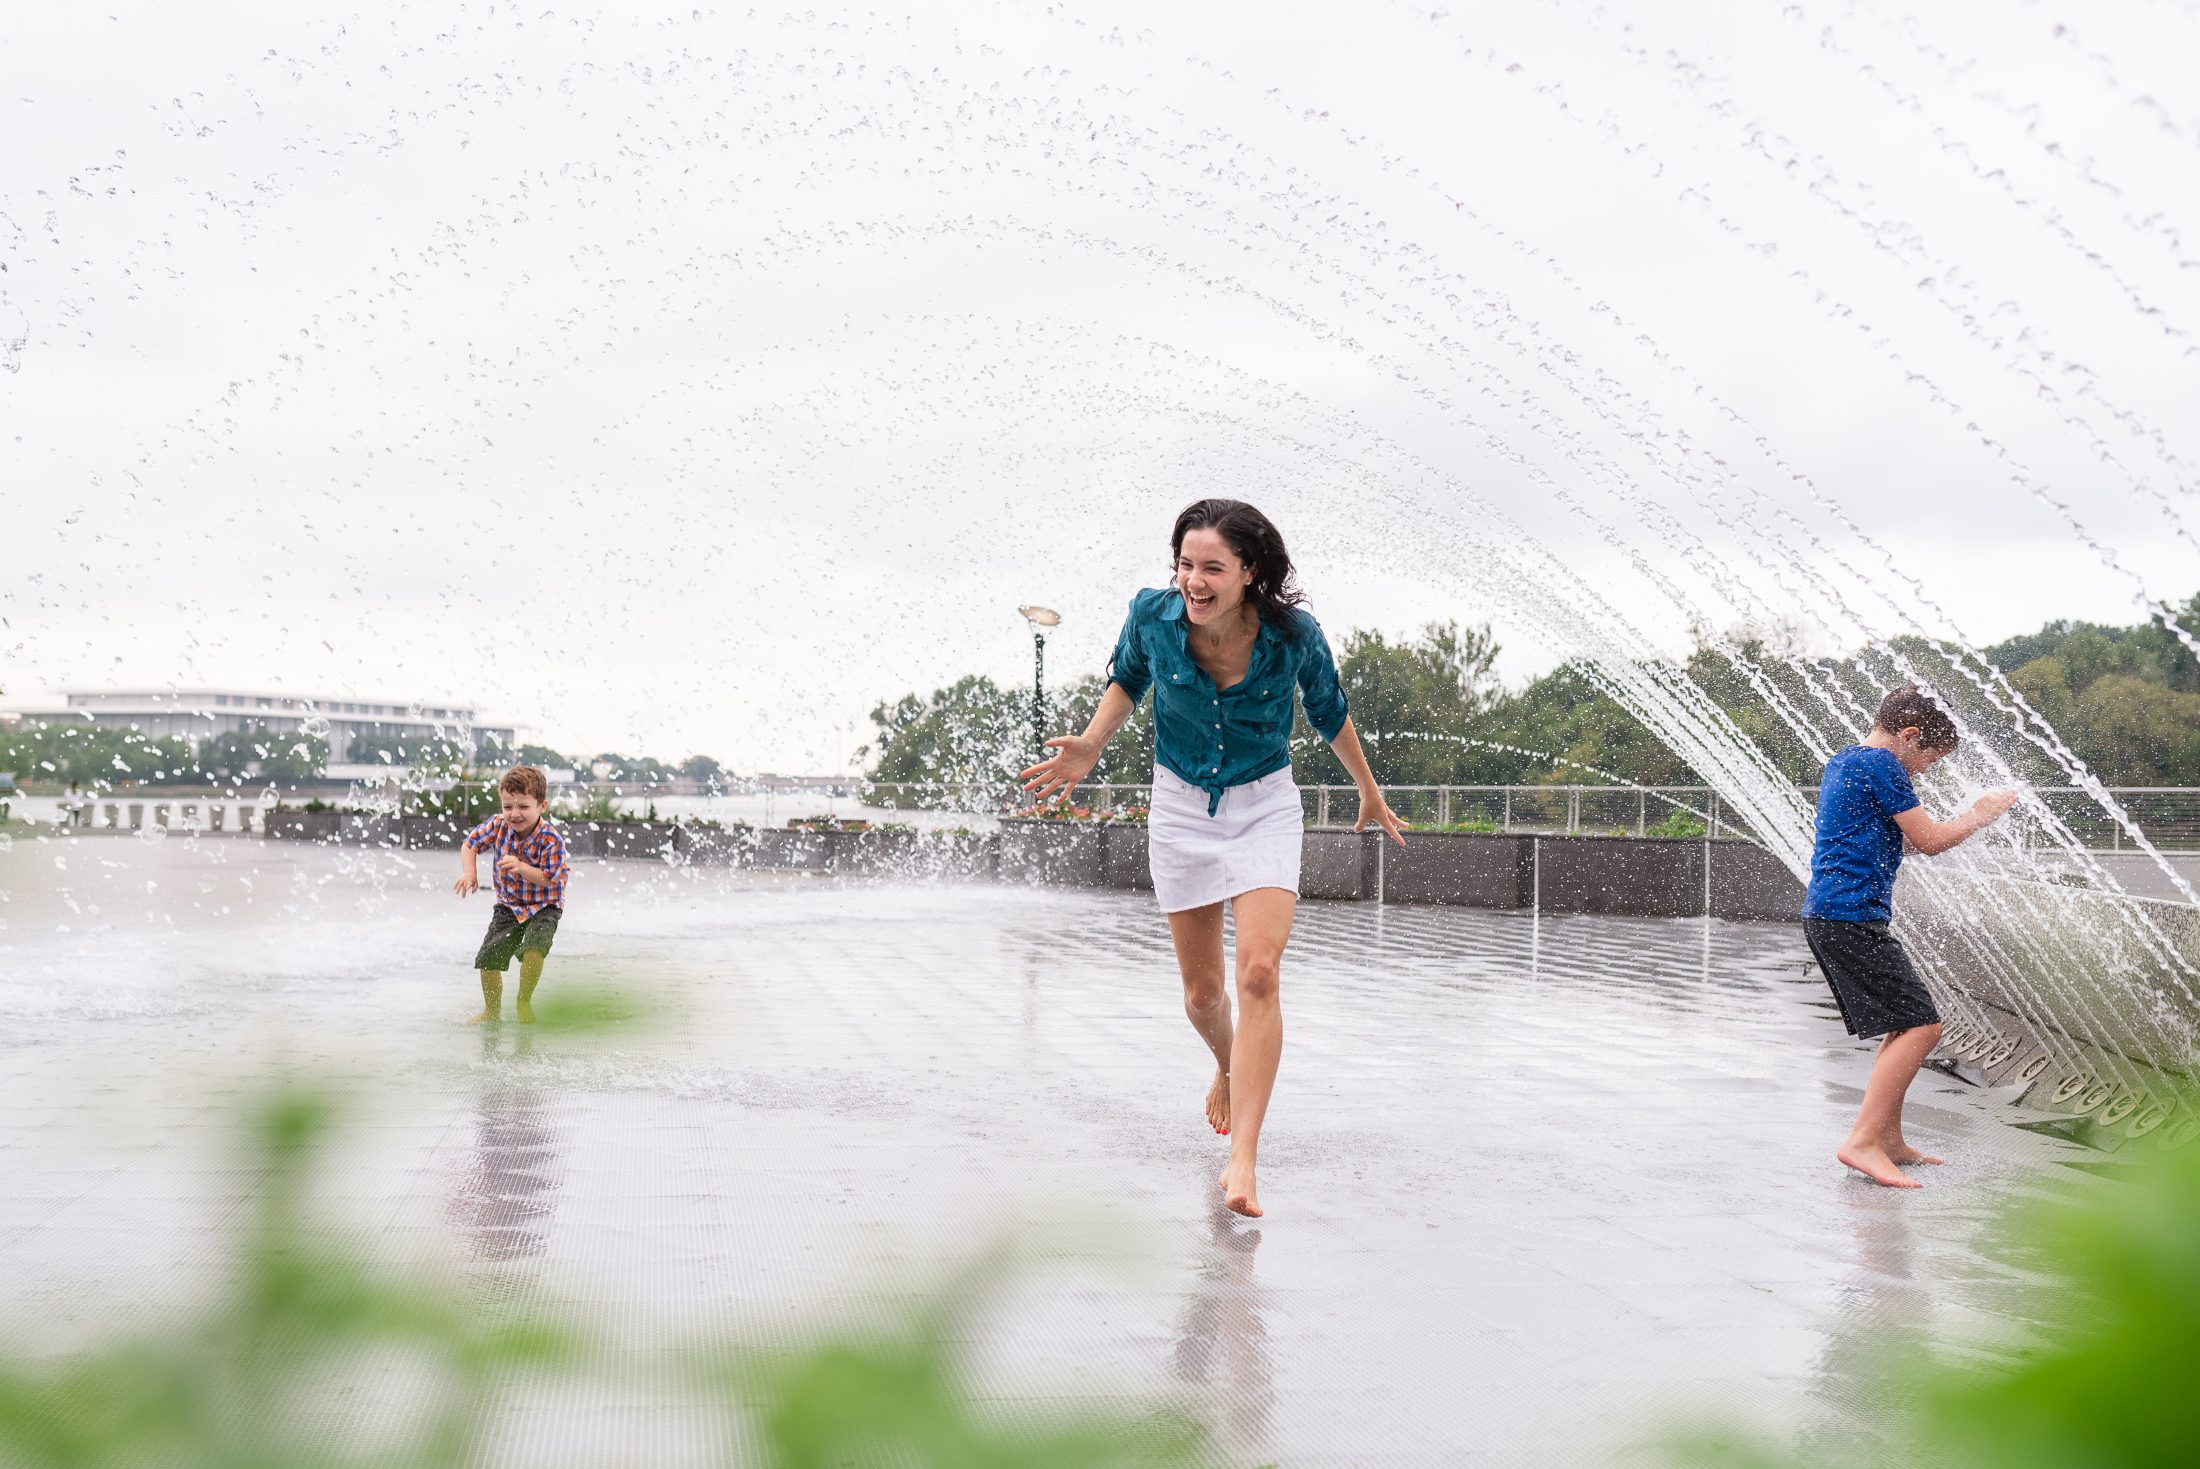 DC widow blog writer Marjorie Brimley plays in fountain with her two sons